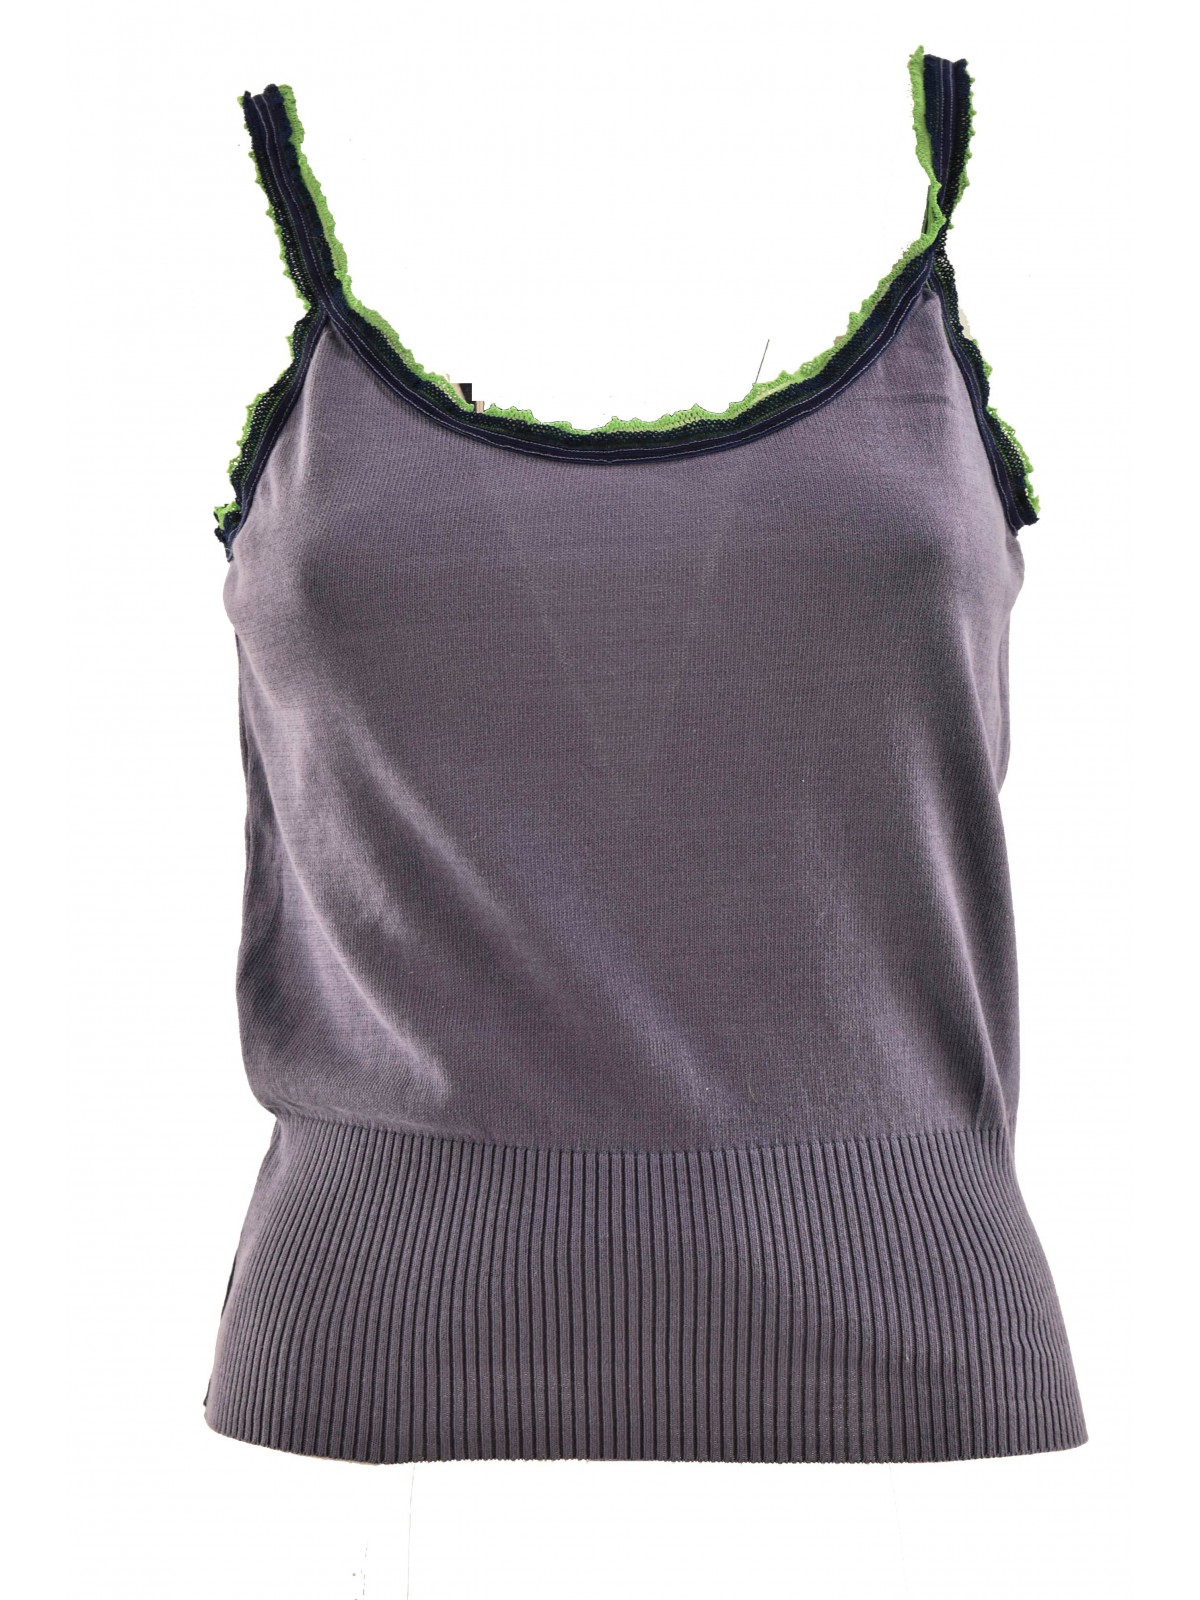 Replay Top Tank Strapless Lace Women's Knit Cotton